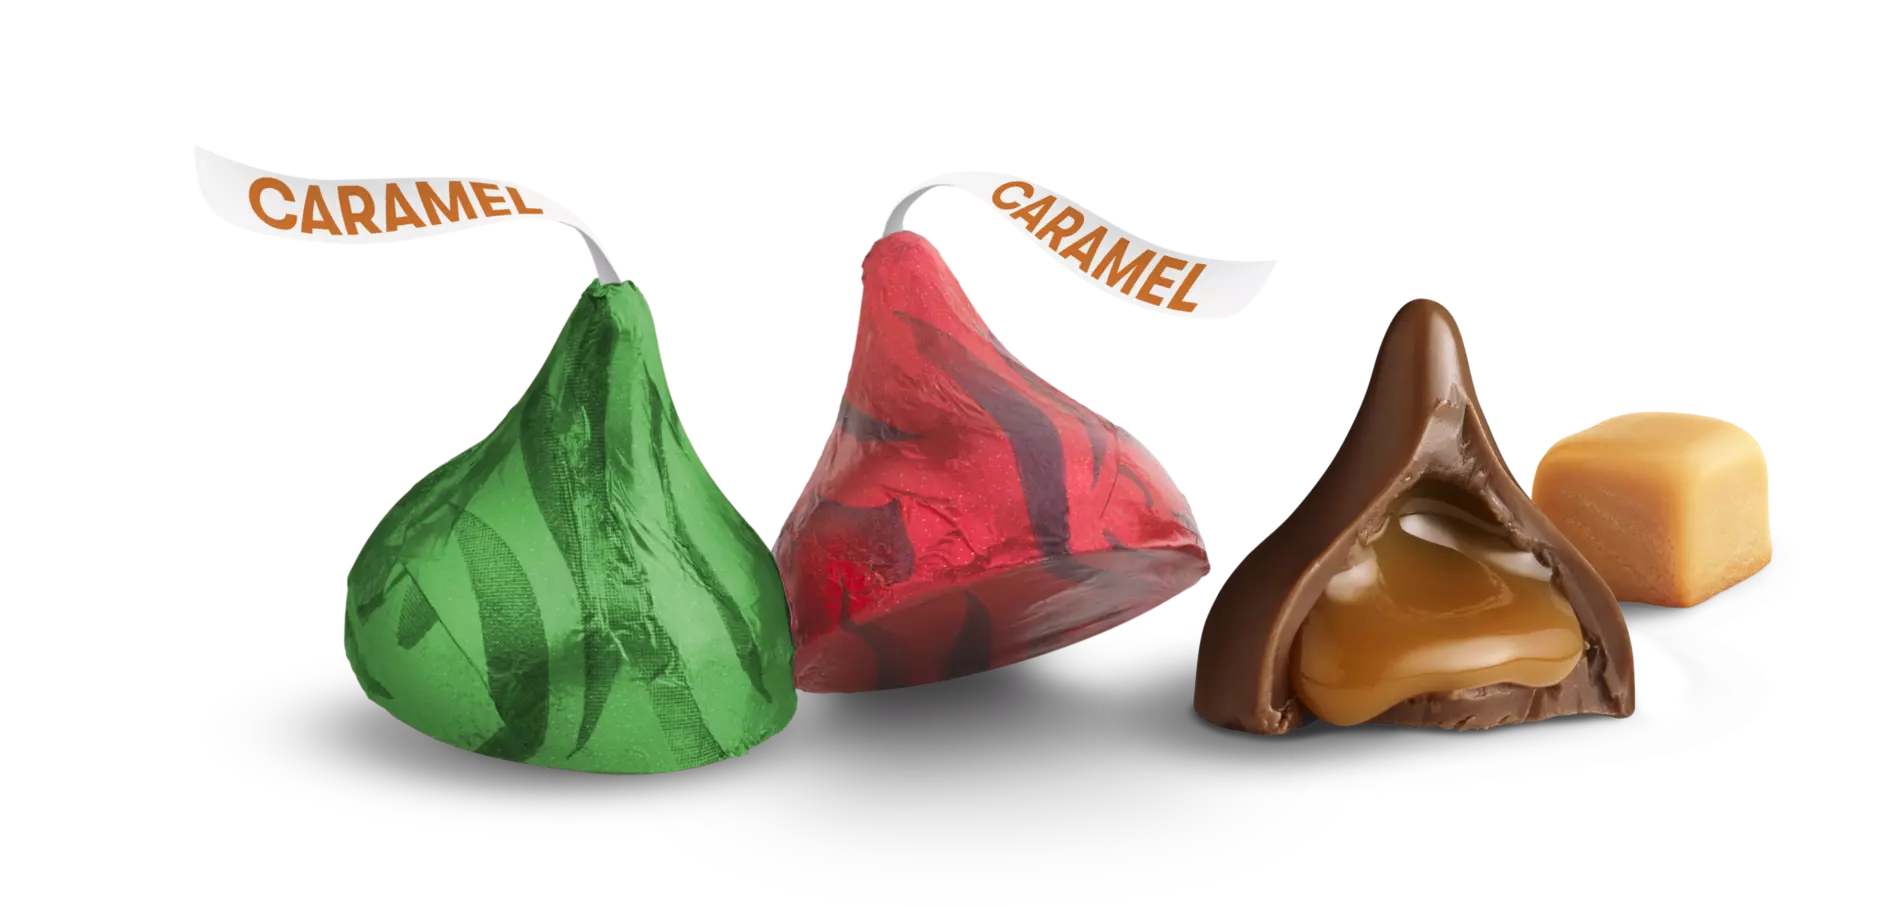 HERSHEY'S KISSES Holiday Caramel Candy, 9 oz bag - Out of Package